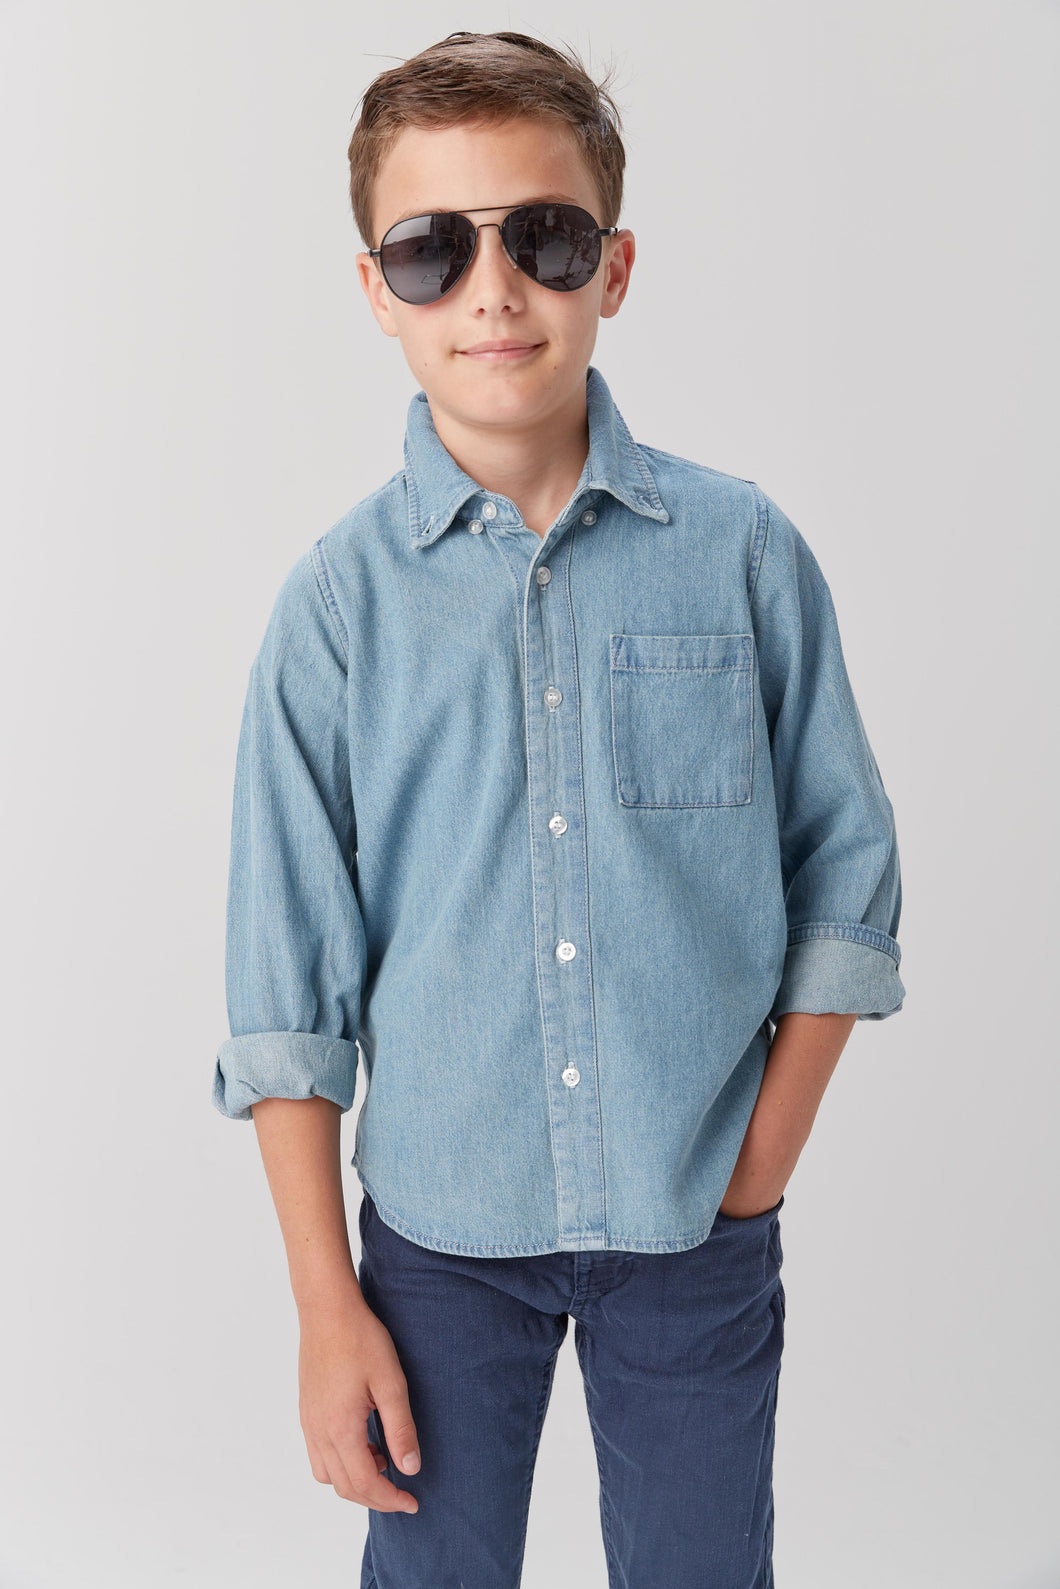 Boys Chambray Button Up